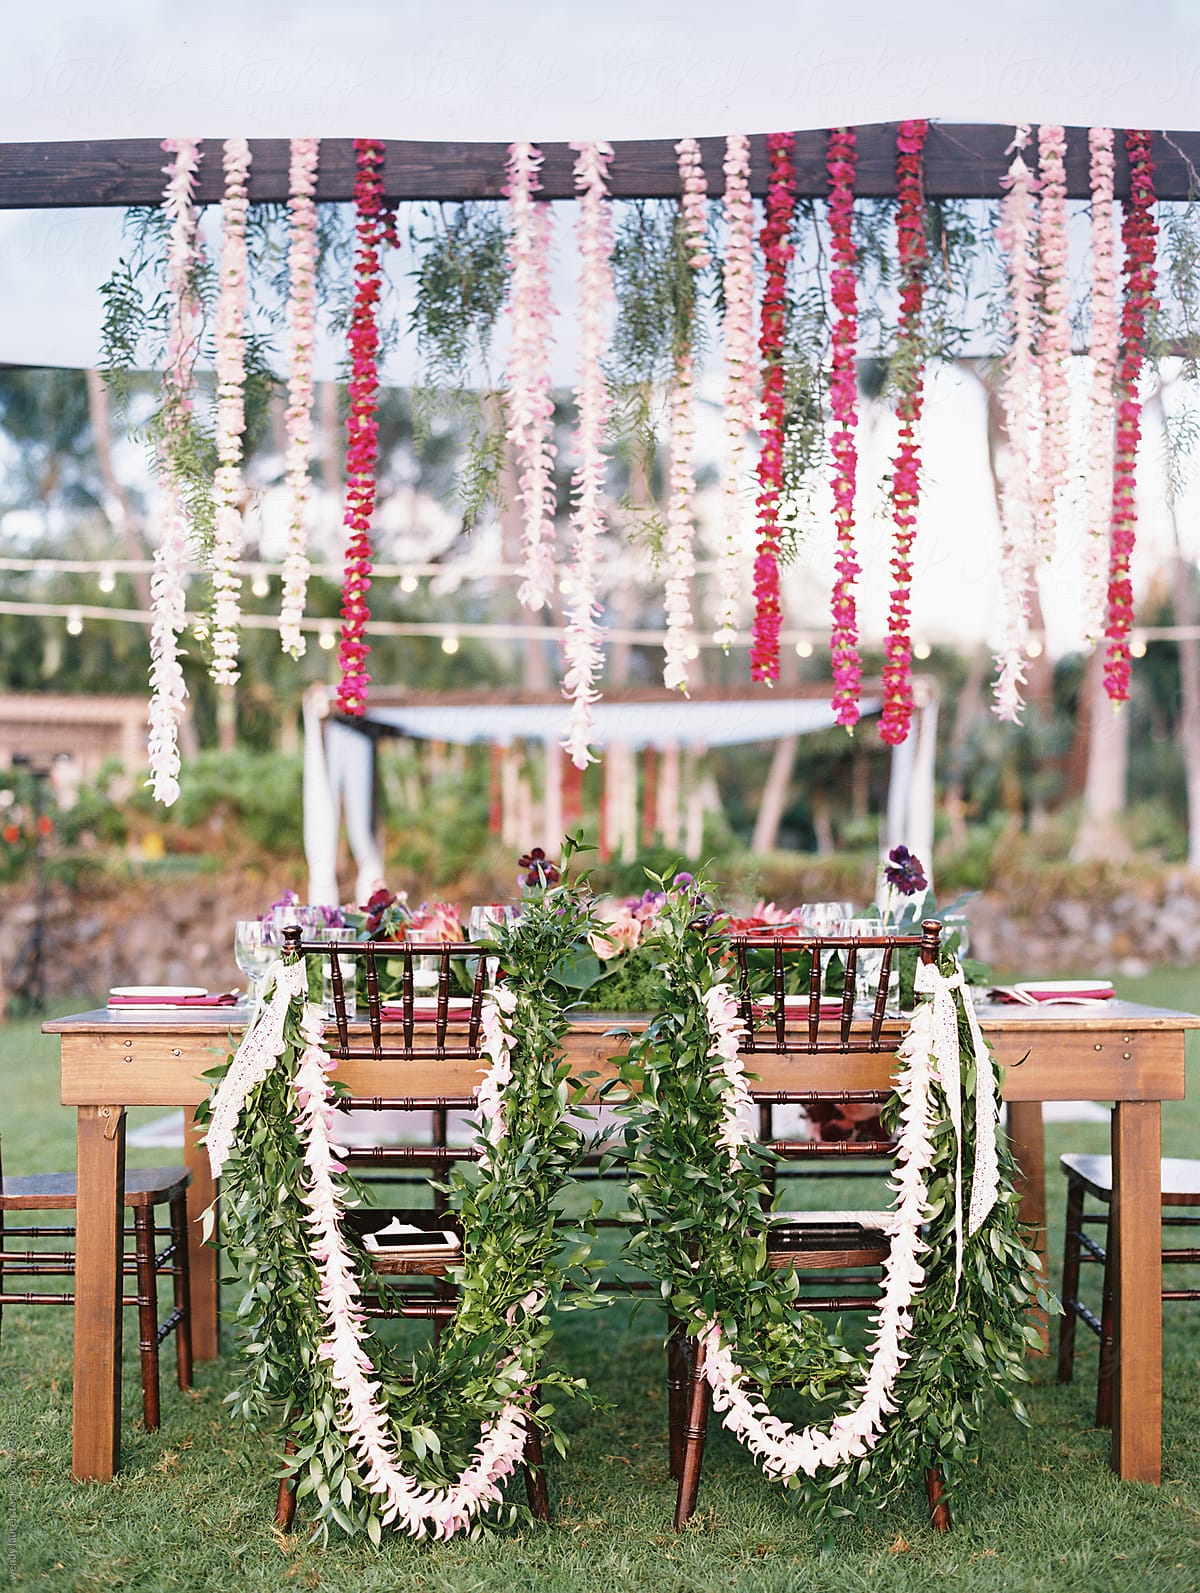 wedding table set up with hanging floral strings and floral decorated chairs